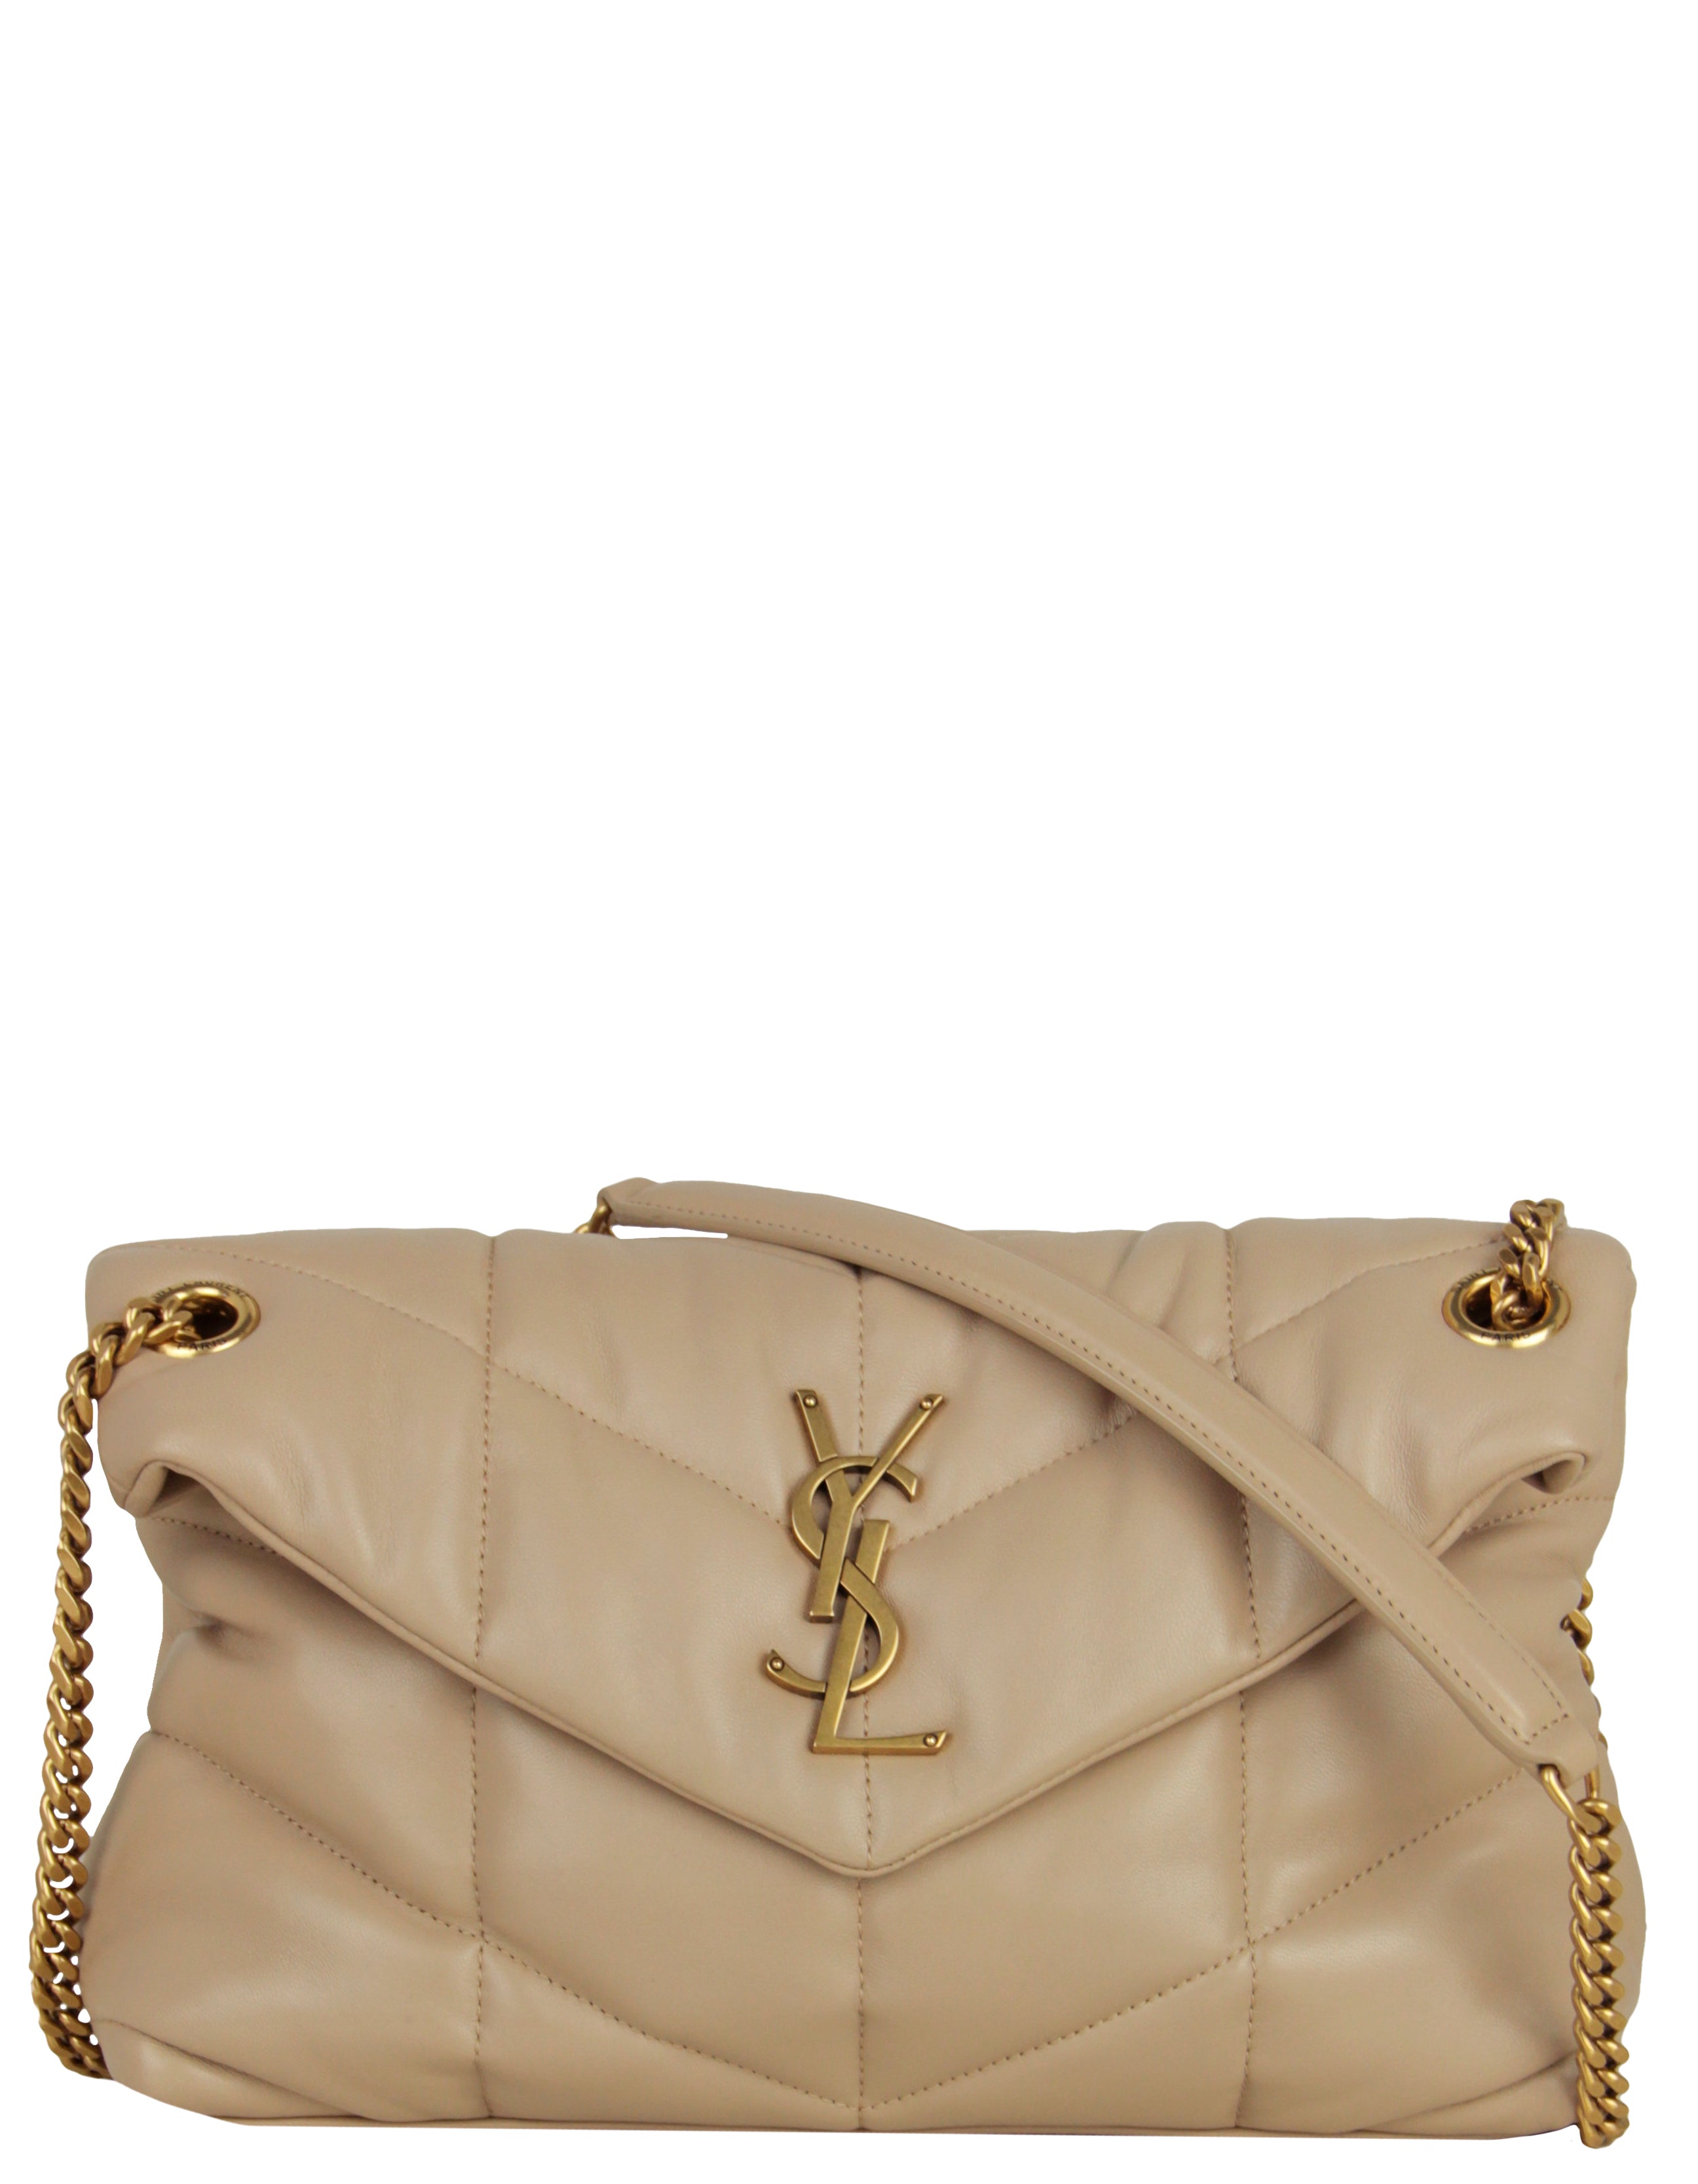 Saint Laurent Beige Leather Small Loulou Puffer Bag